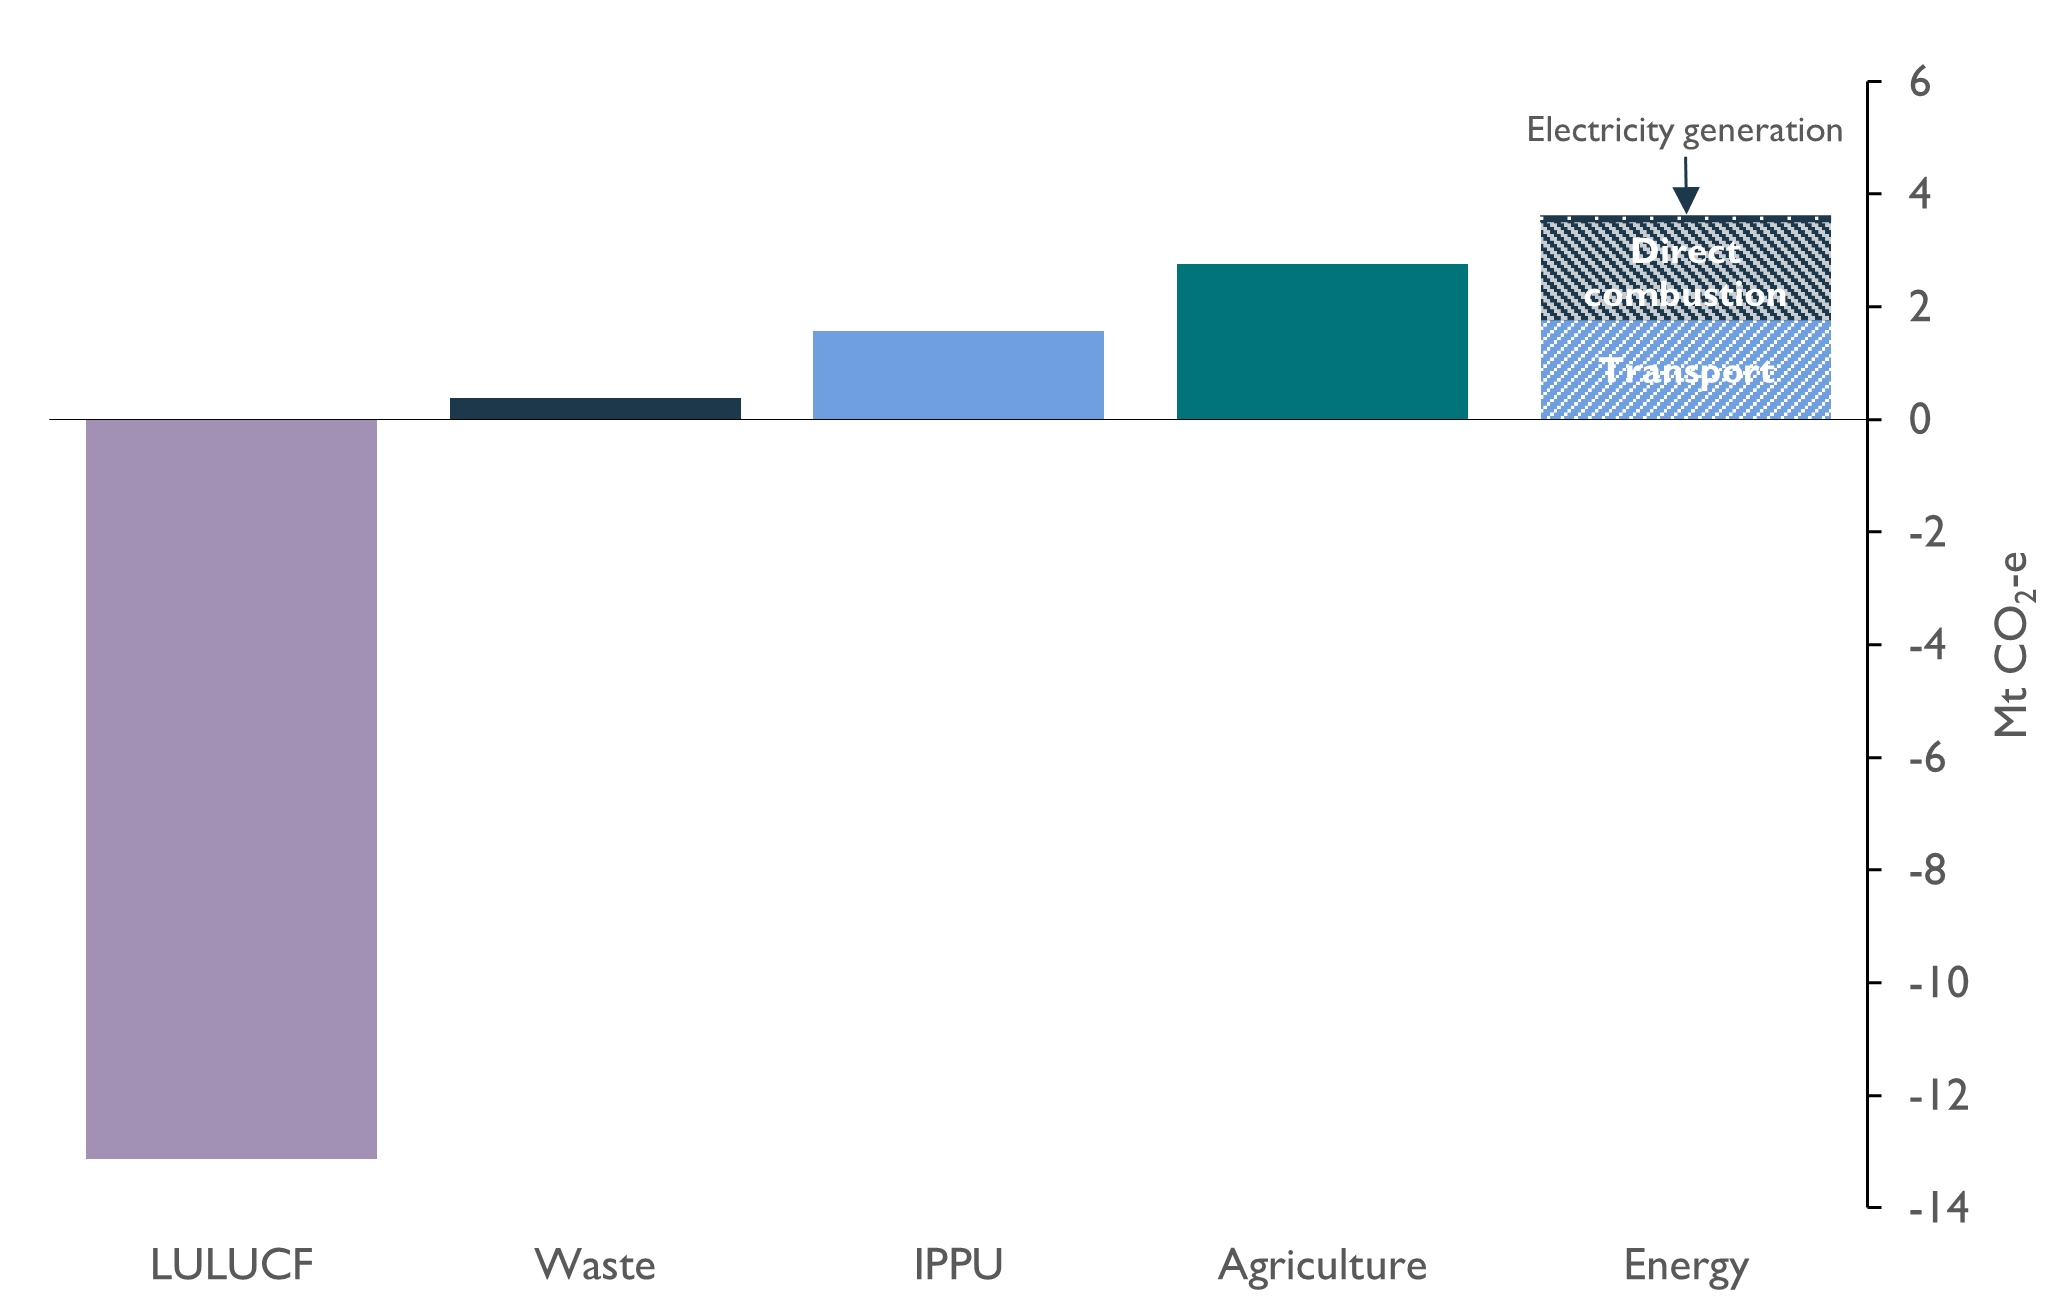 This figure combines a bar chart with a stacked bar chart to show the emissions and removals of different sectors and energy sub-sectors to Tasmania’s net emissions for 2021 of minus 4.80 Mt CO2-e. Those contributions comprise the energy sector (3.63 Mt CO2-e total) which comprises the subsectors of direct combustion (1.74 Mt CO2-e), transport (1.75 Mt CO2-e) and electricity generation (0.13 Mt CO2-e). The other sectoral contributions are from agriculture (2.76 Mt CO2-e), IPPU (1.56 Mt CO2-e), Waste (0.38 Mt CO2-e) and LULUCF (-13.13 Mt CO2-e). The bar chart highlights the significant impact of the LULUCF sector in offsetting Tasmania’s net emissions.